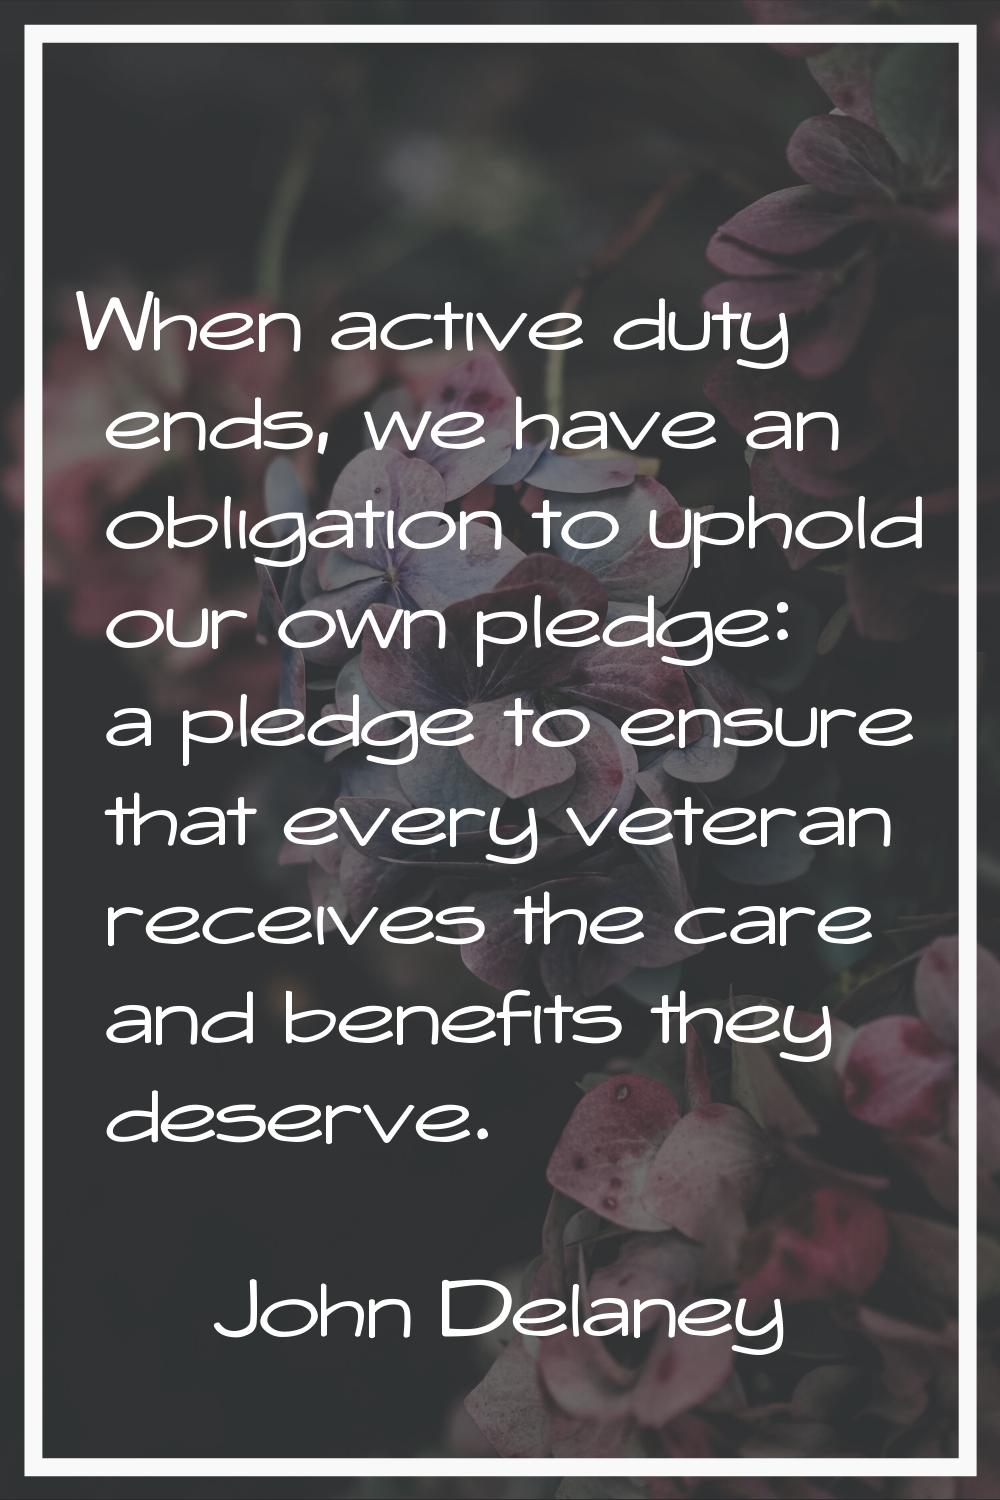 When active duty ends, we have an obligation to uphold our own pledge: a pledge to ensure that ever